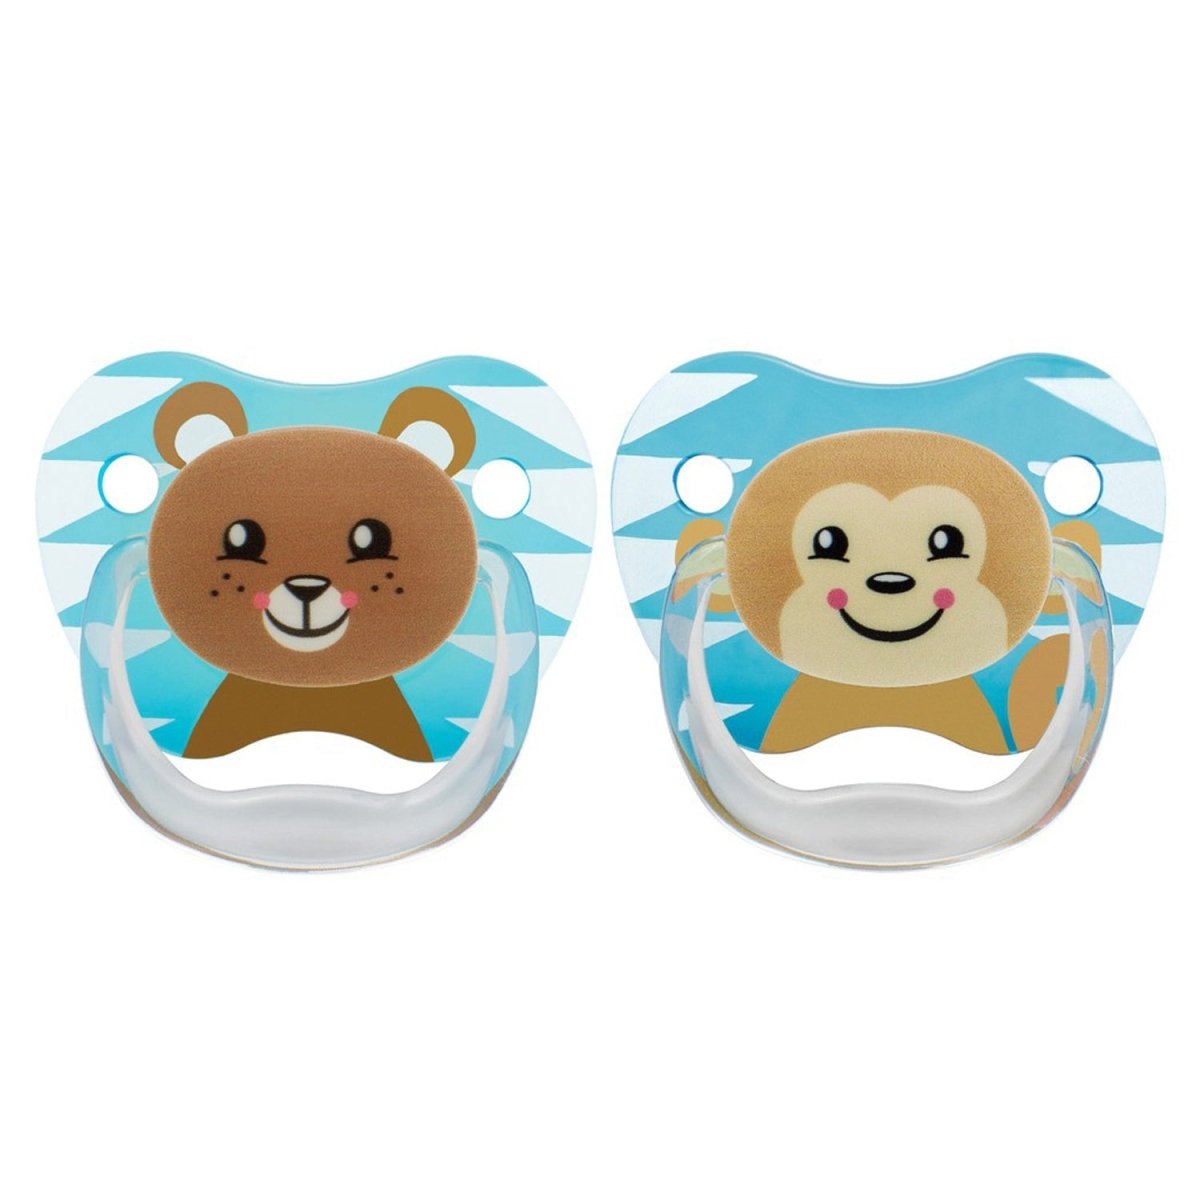 Dr. Browns Printed Shield Soother - Stage 2, 2-Pack - Blue - DBPV22015-SPX